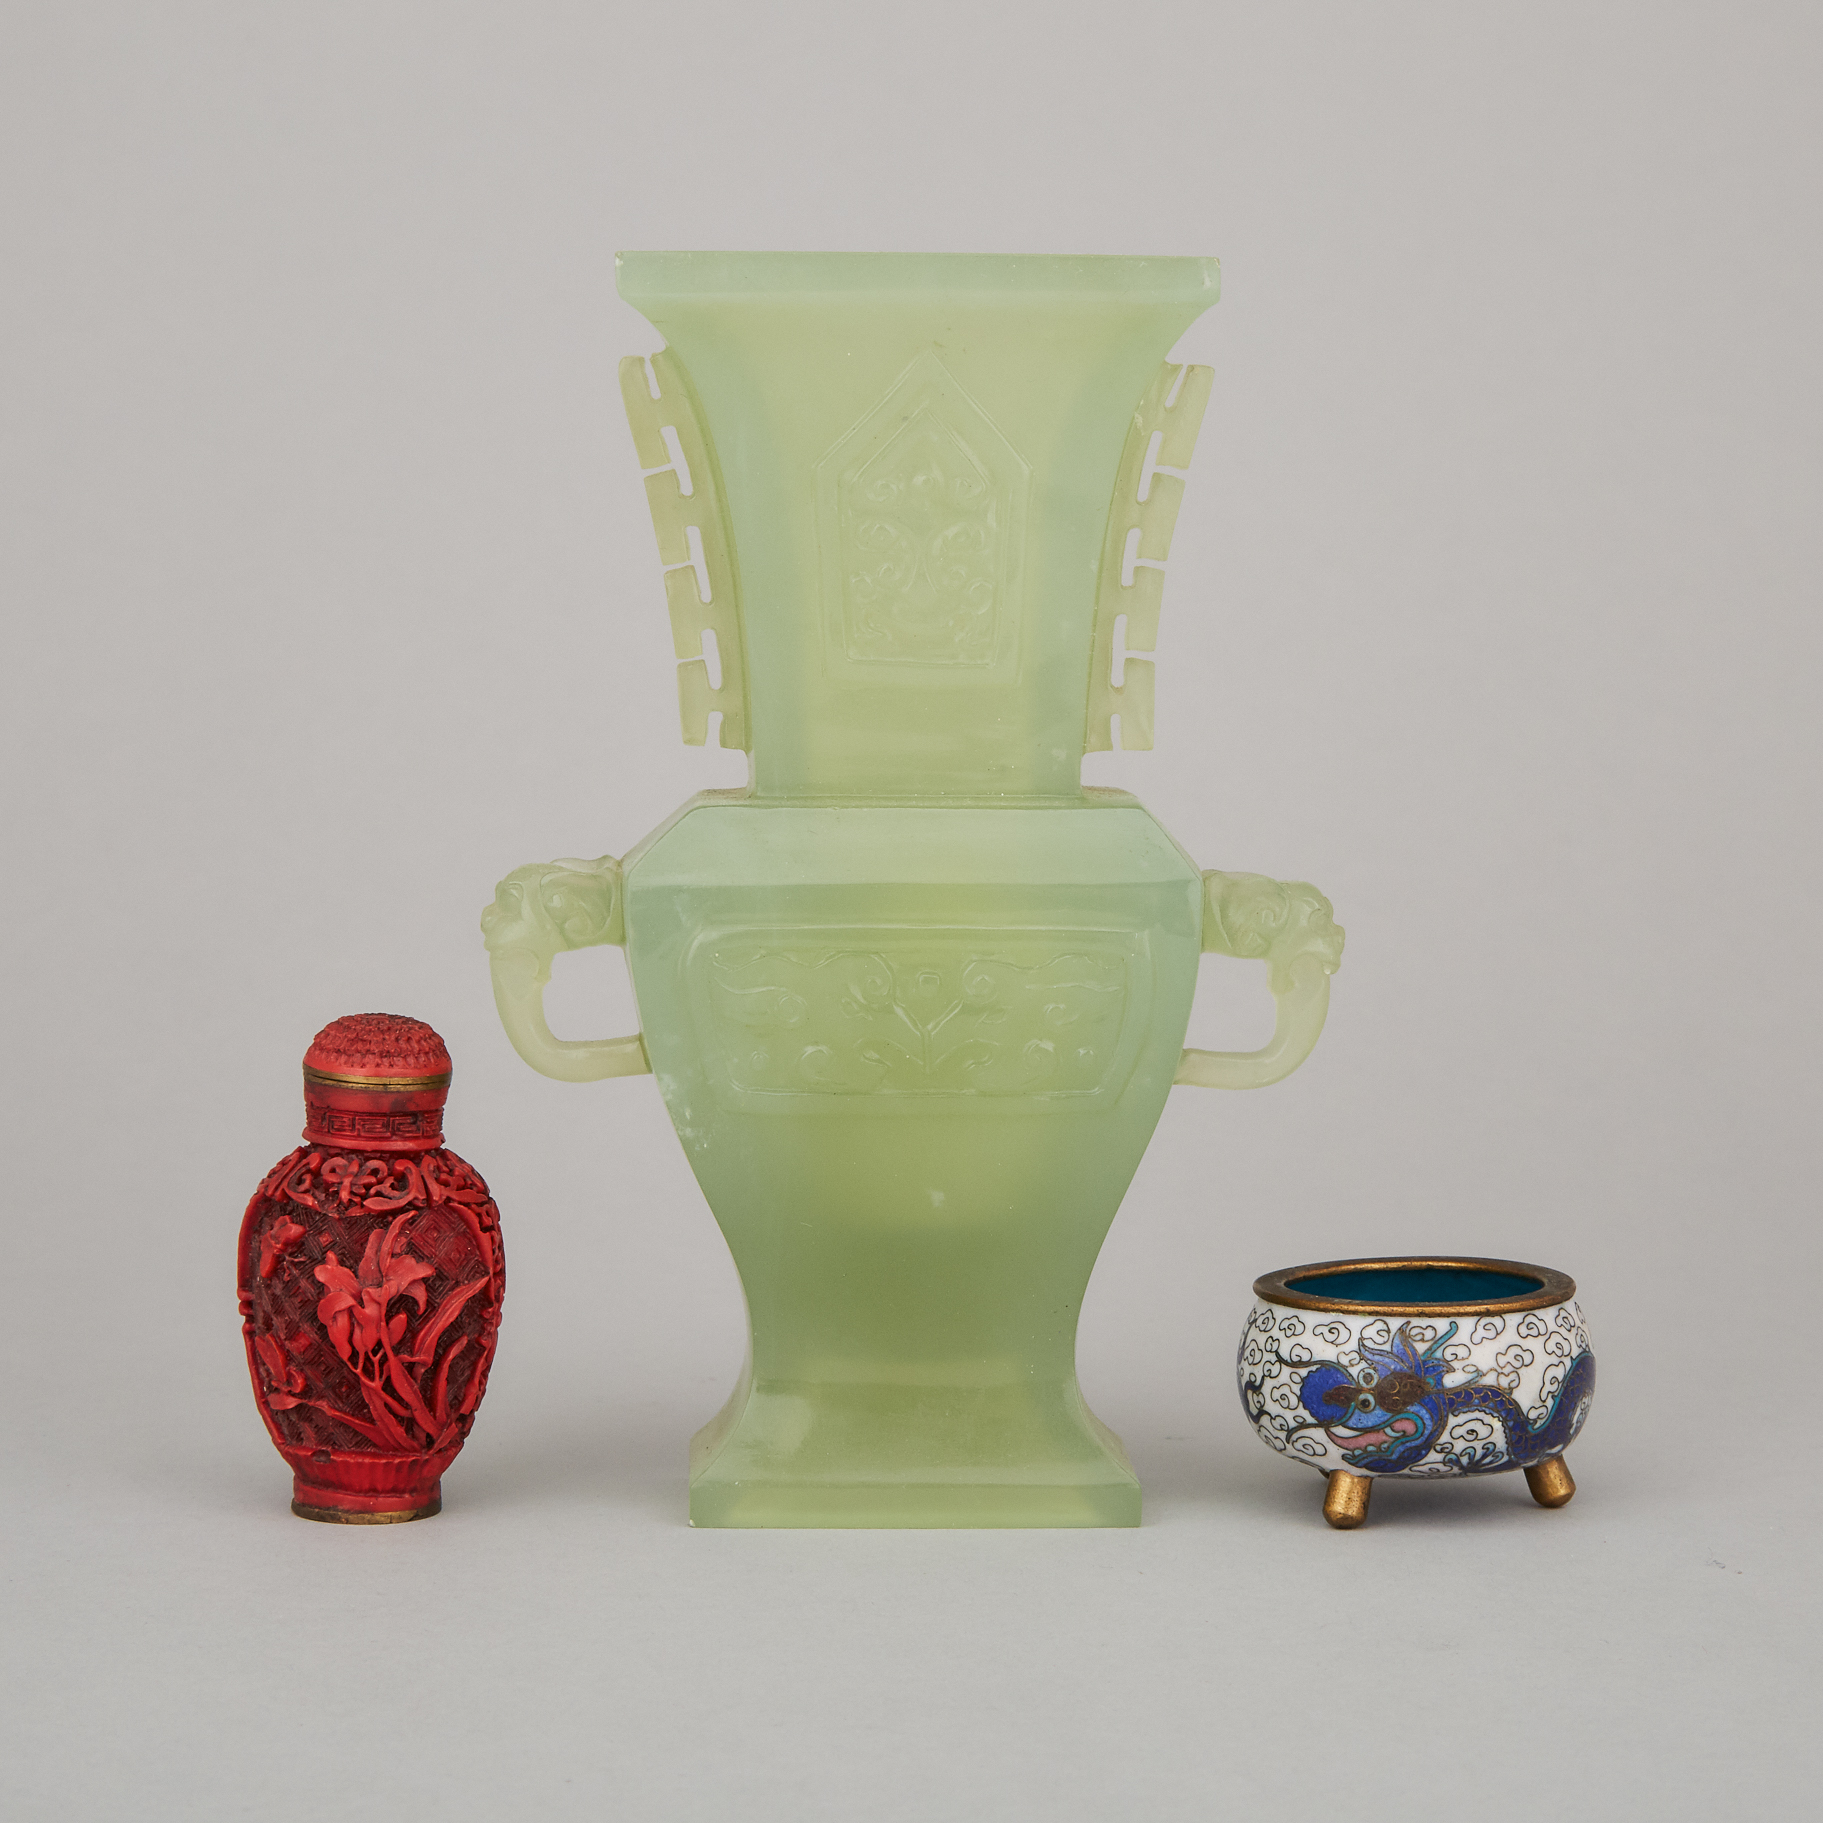 A Group of Three Chinese Art Items